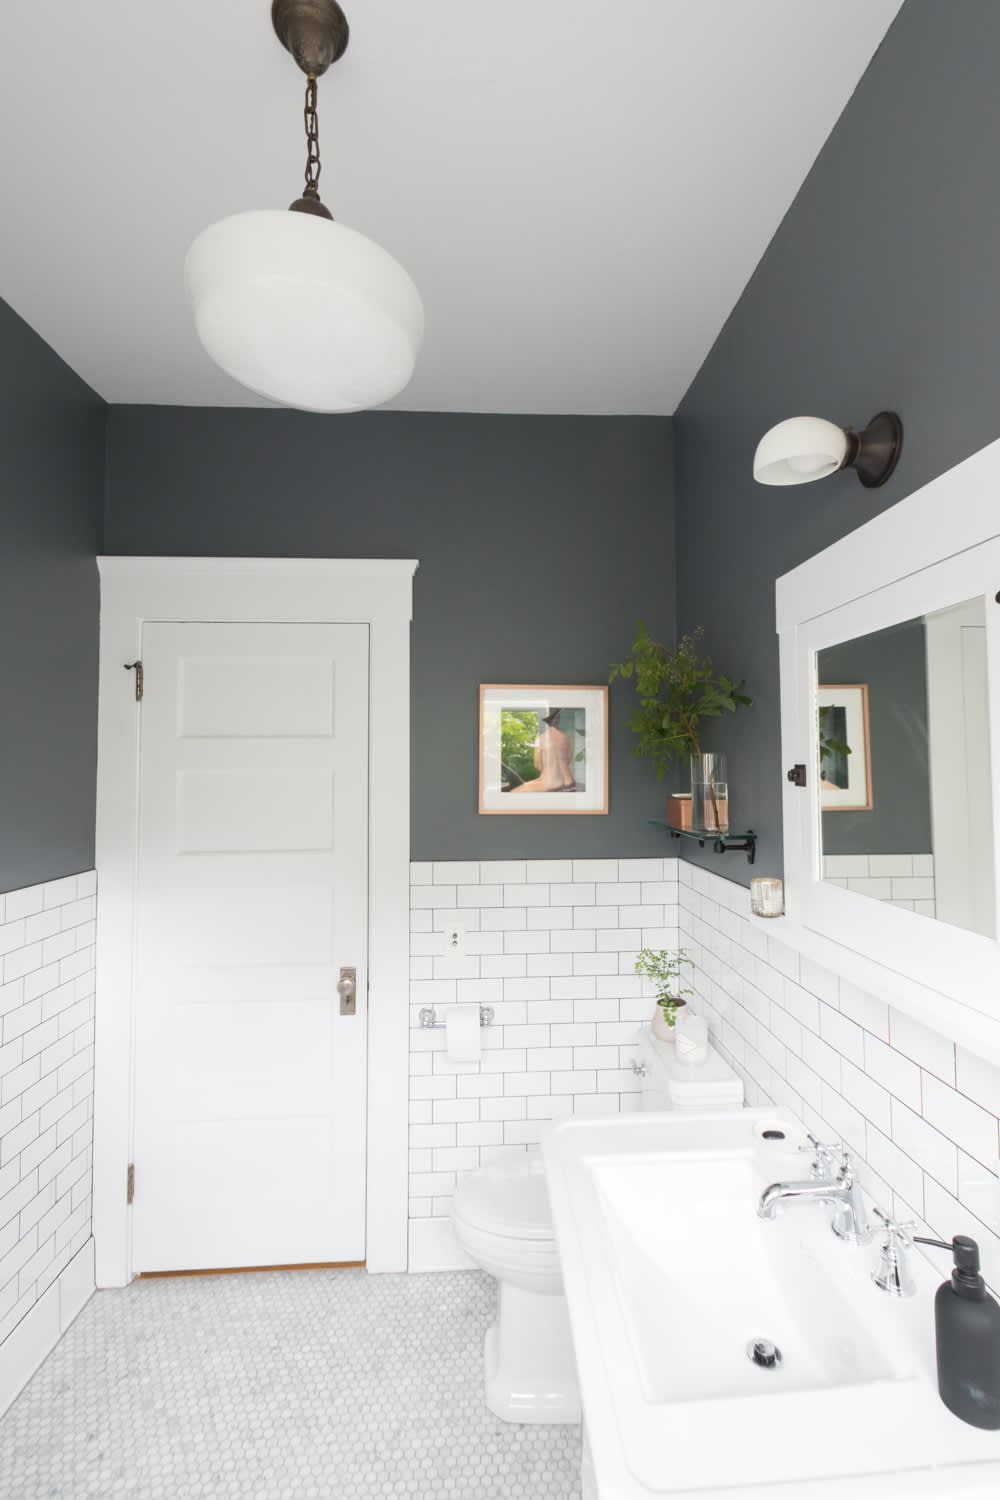 Green Wainscot in a Bathroom Brightens Up a Small Space – Clare